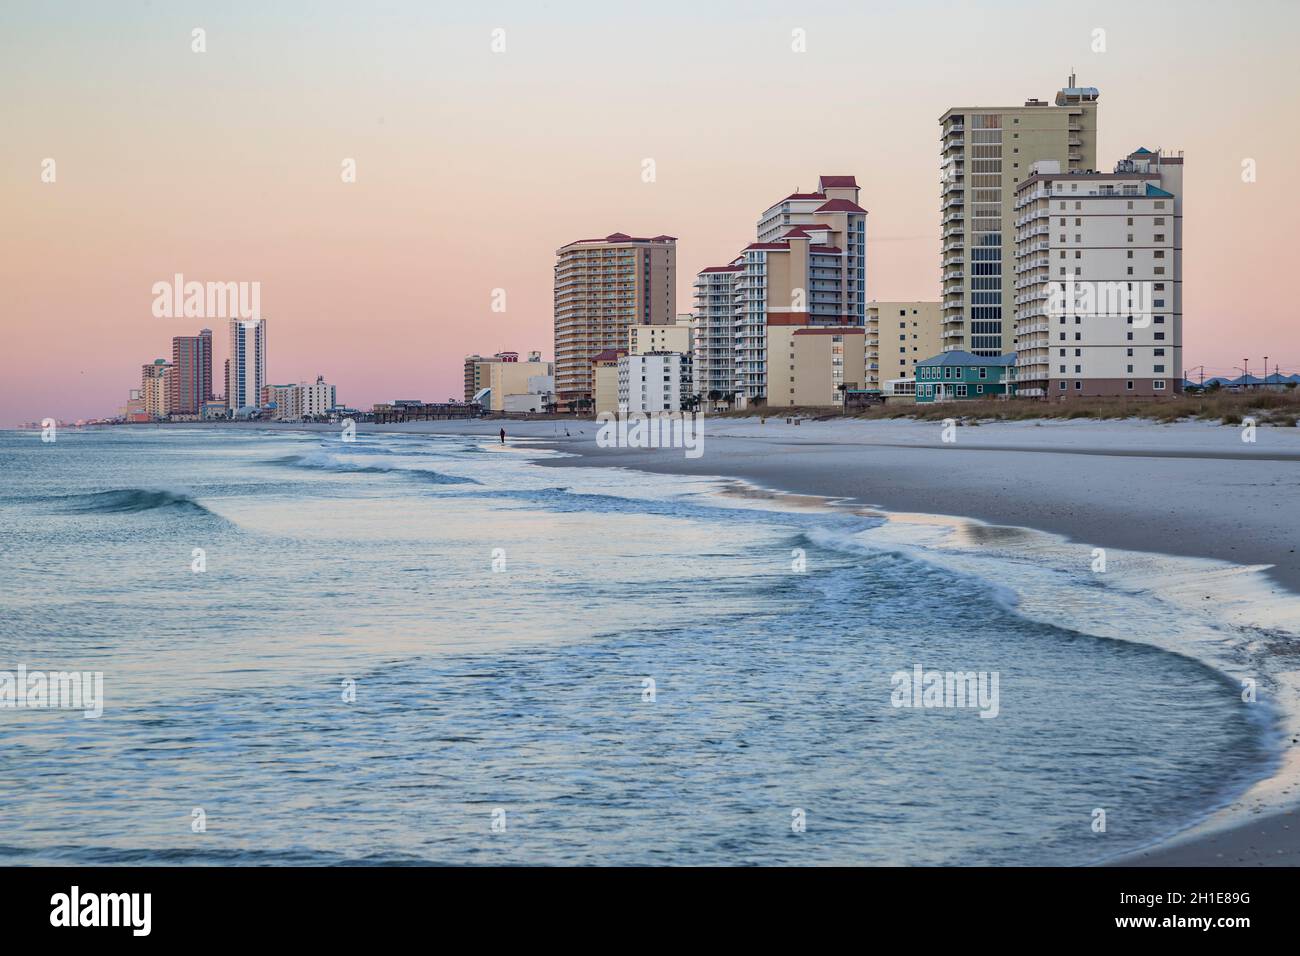 Hotels and condominiums along the beach in Gulf Shores, Alabama Stock Photo